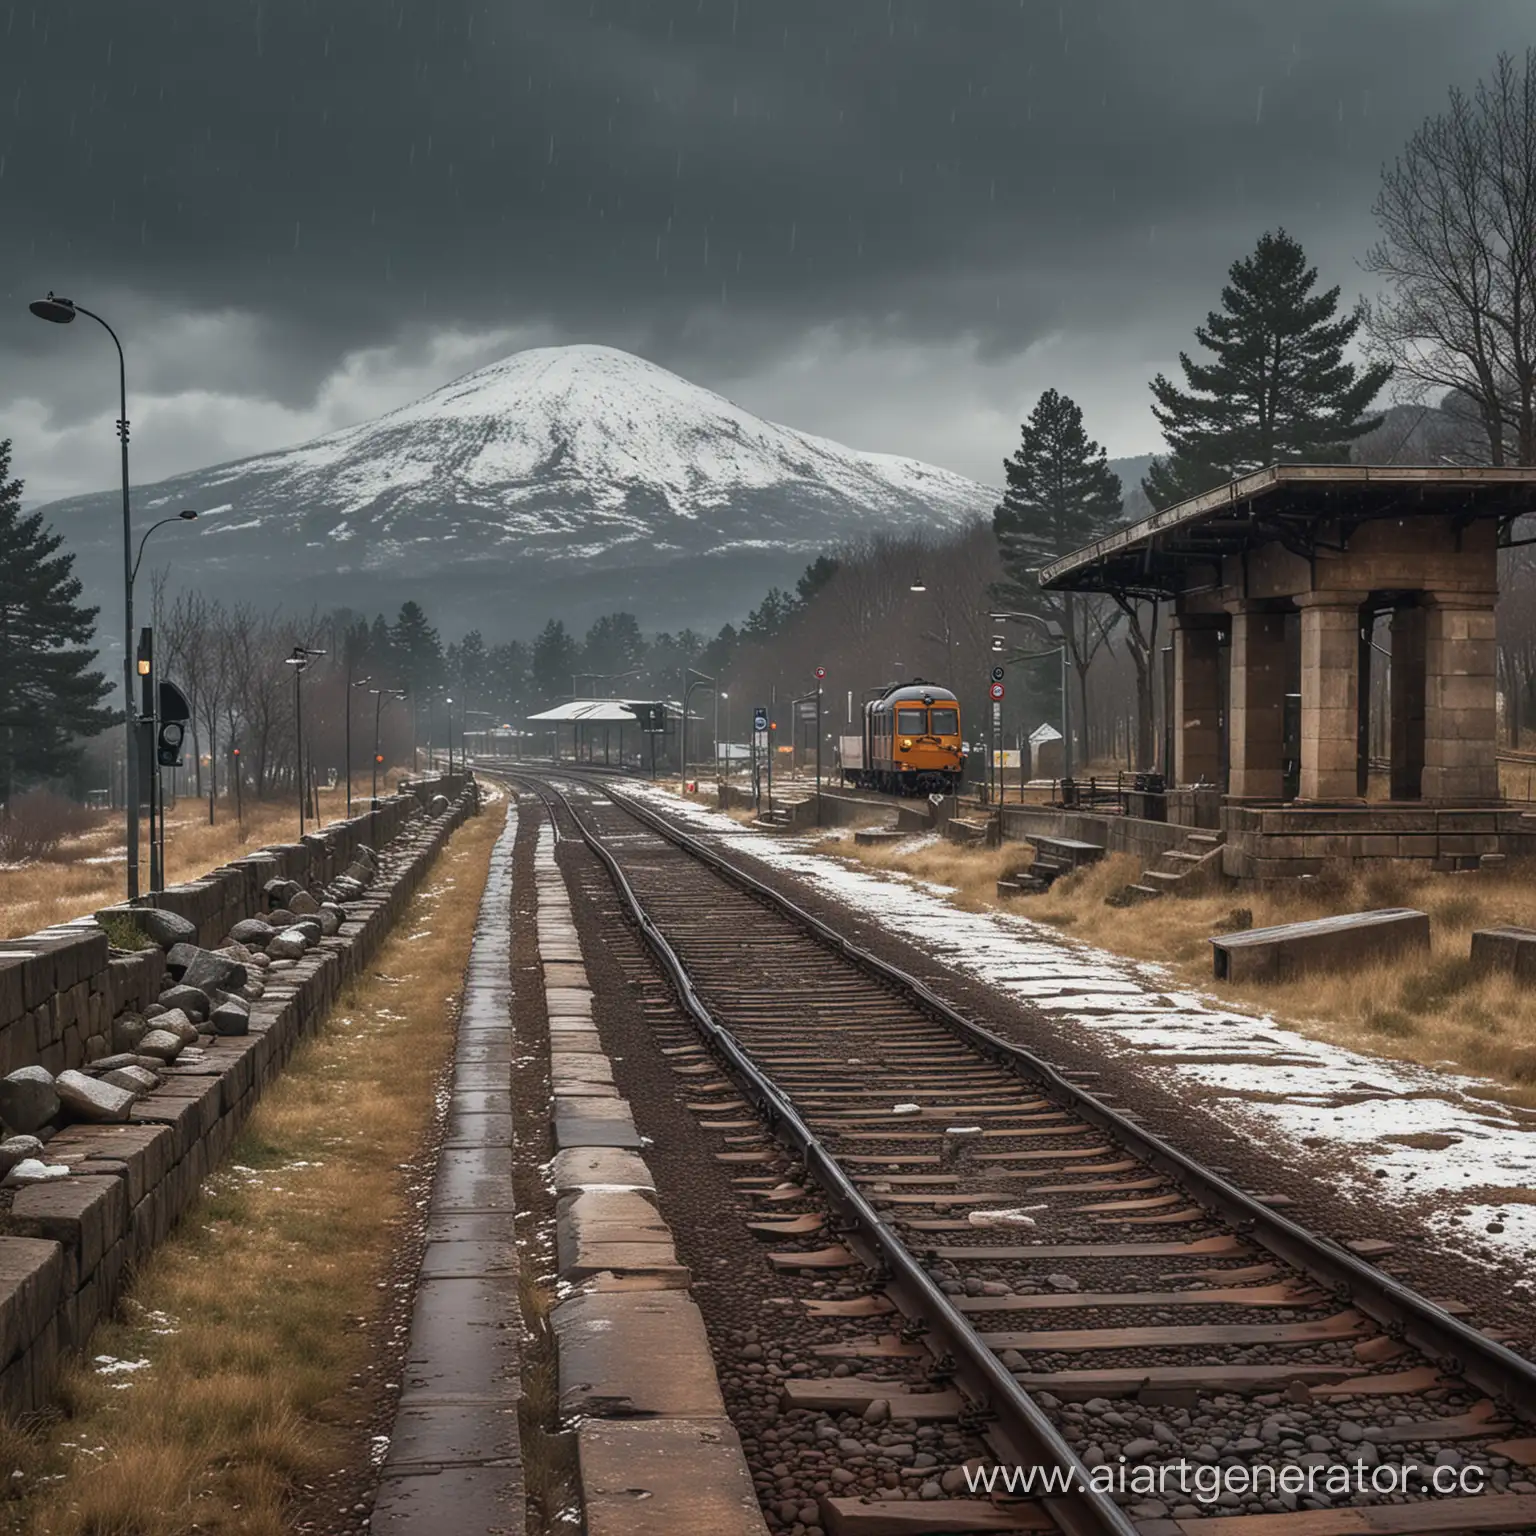 Etruscan-Temple-Railway-Platform-with-Snowy-Mountain-View